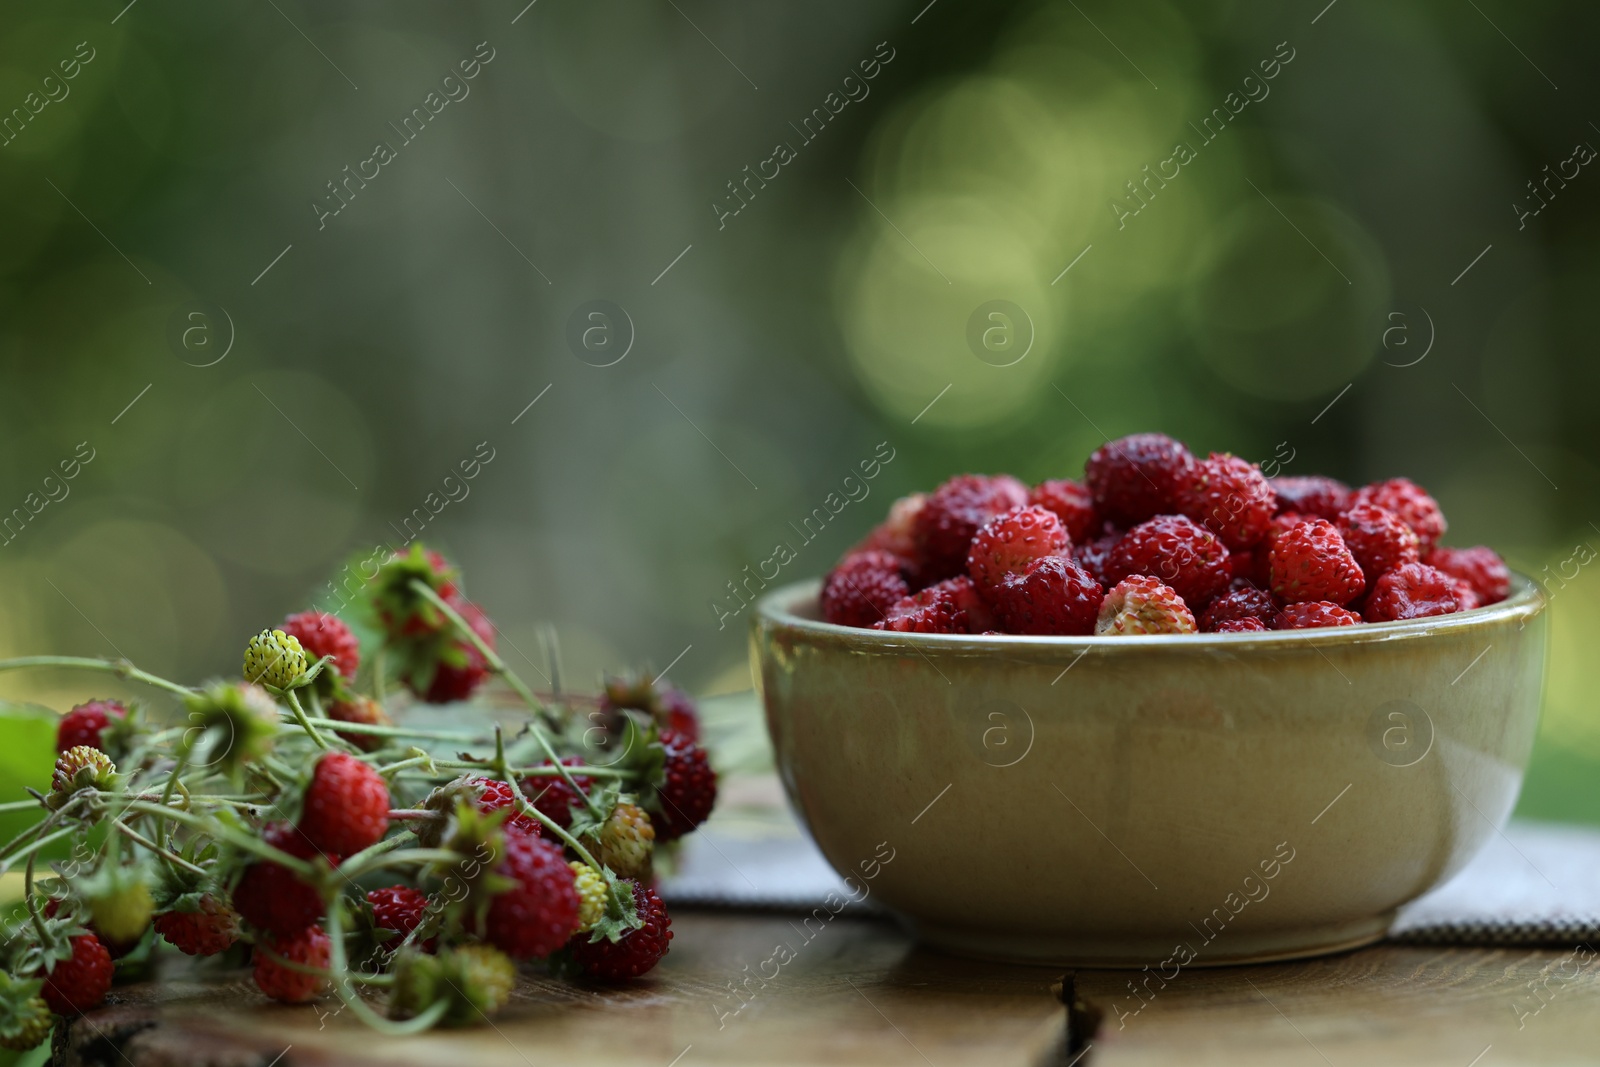 Photo of Bowl and tasty wild strawberries on wooden stump against blurred green background. Space for text